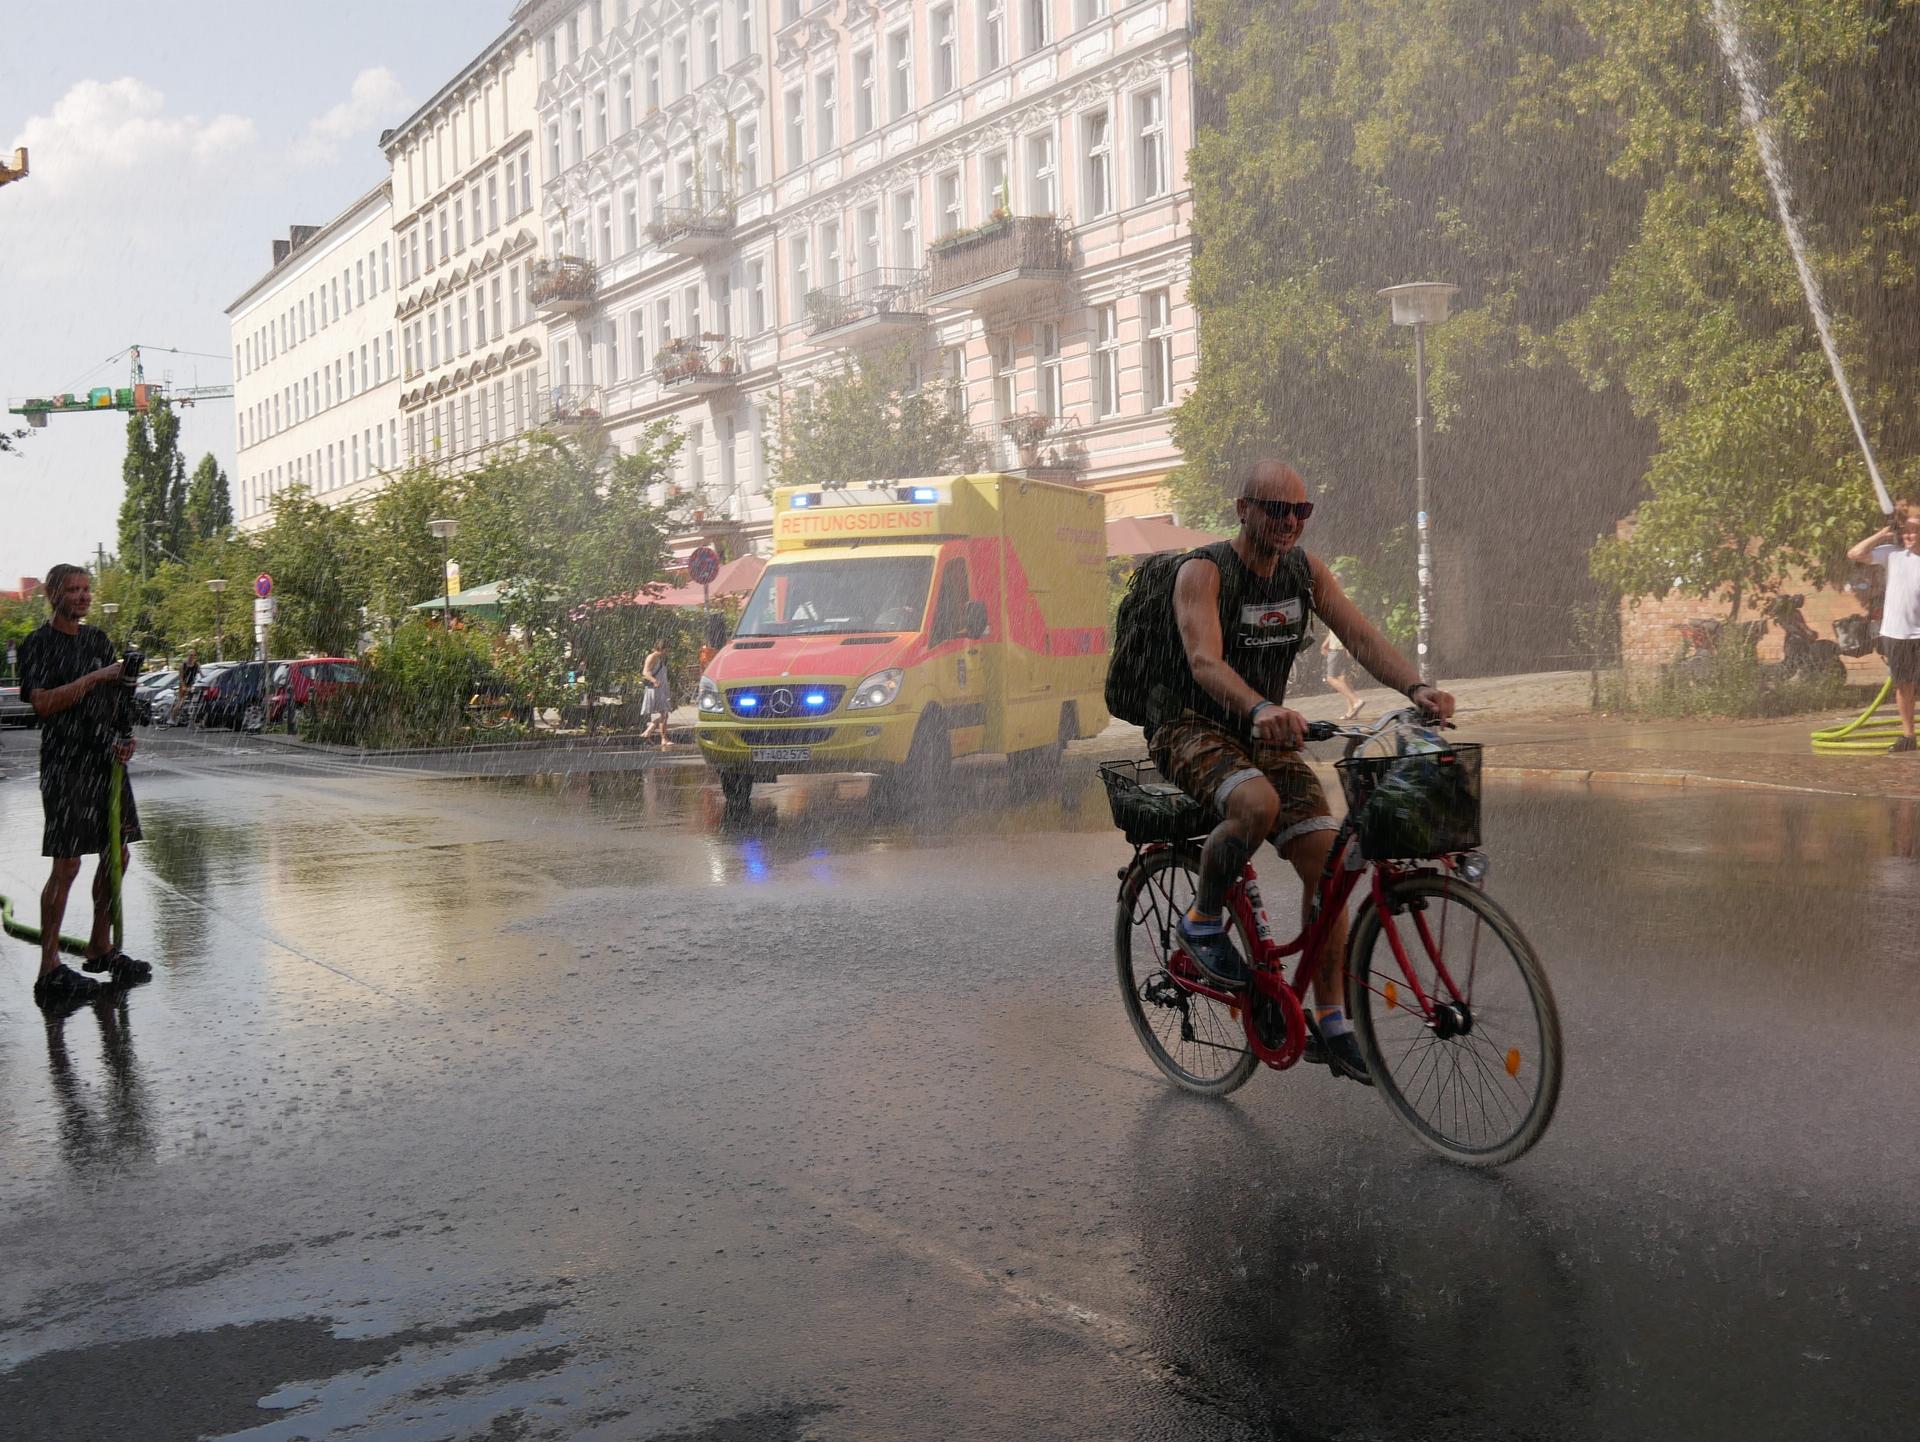 Firefighters blast water in Berlin in mid-August, providing relief from the heat. This is among the few ways to cool off in a city with little air conditioning.